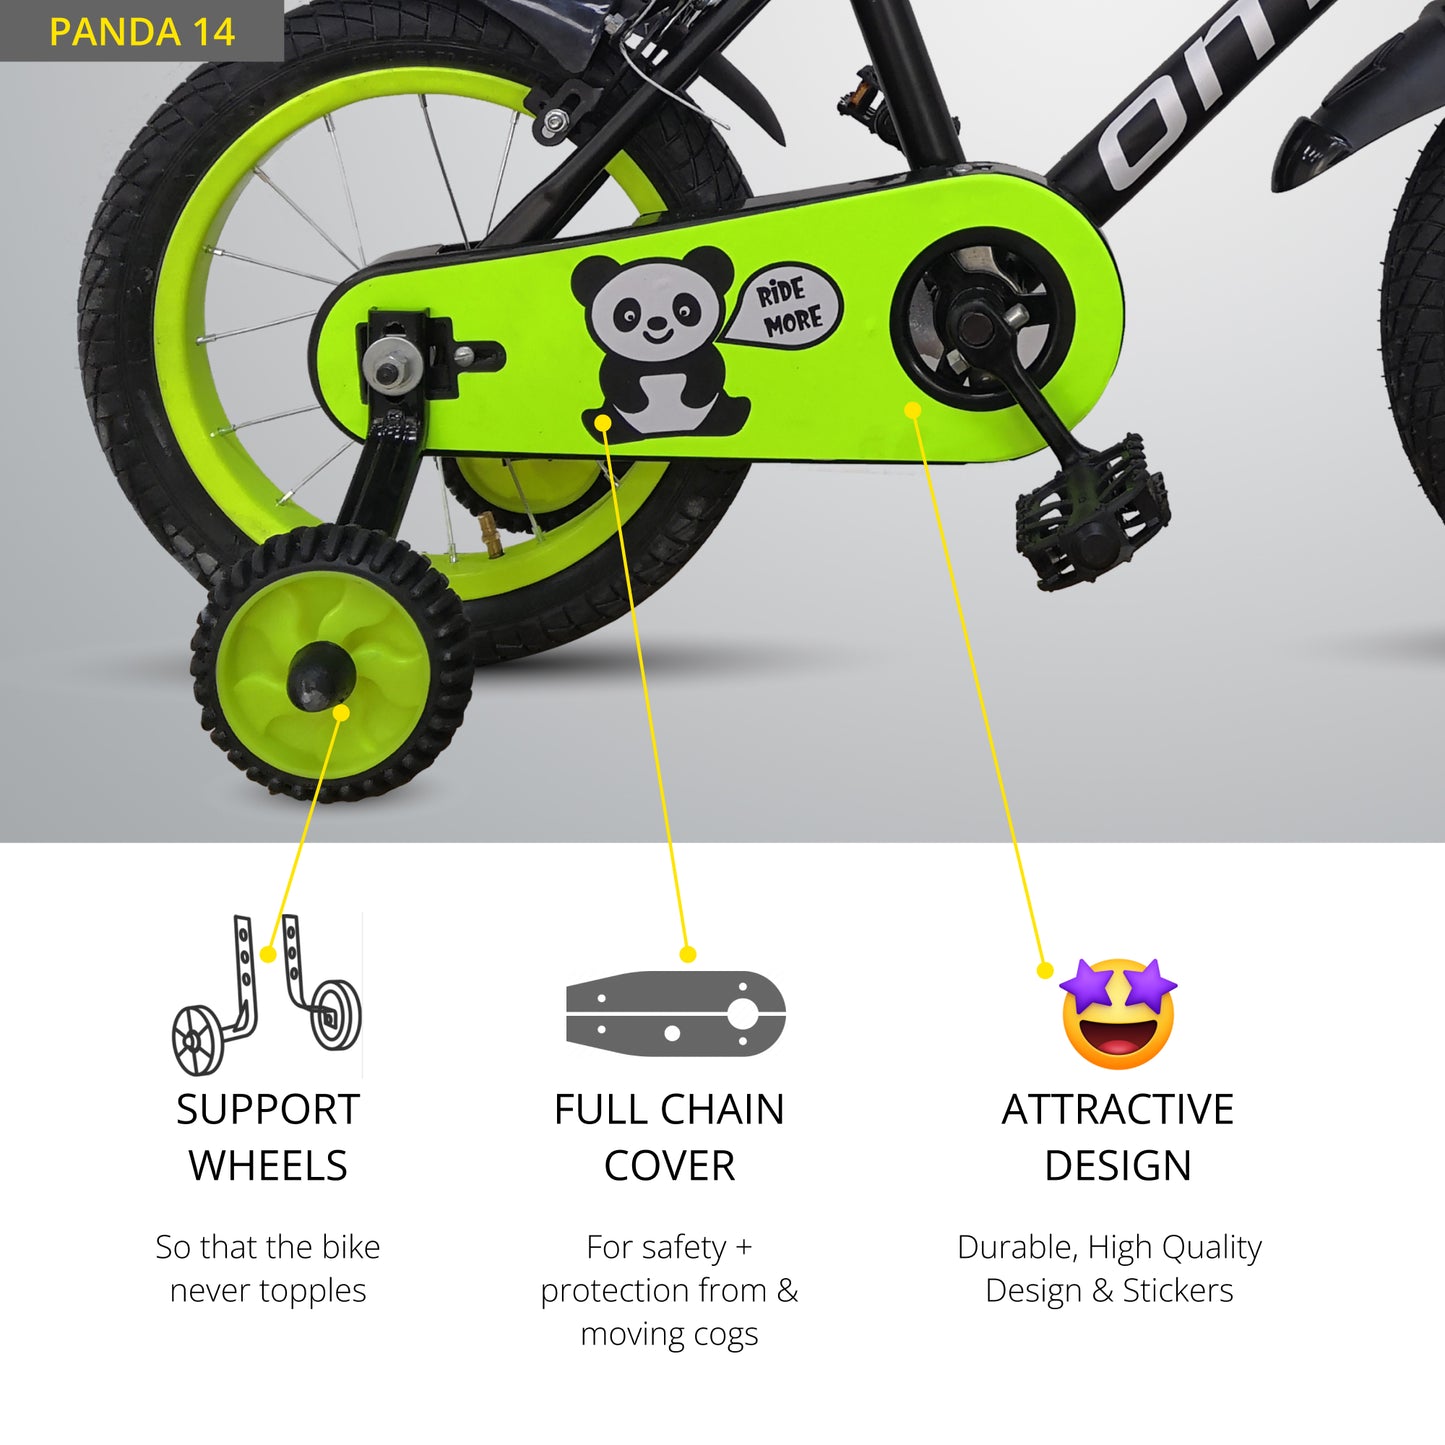 omobikes panda 14T kids cycle 3 to 5 year key features support wheel, pedal view